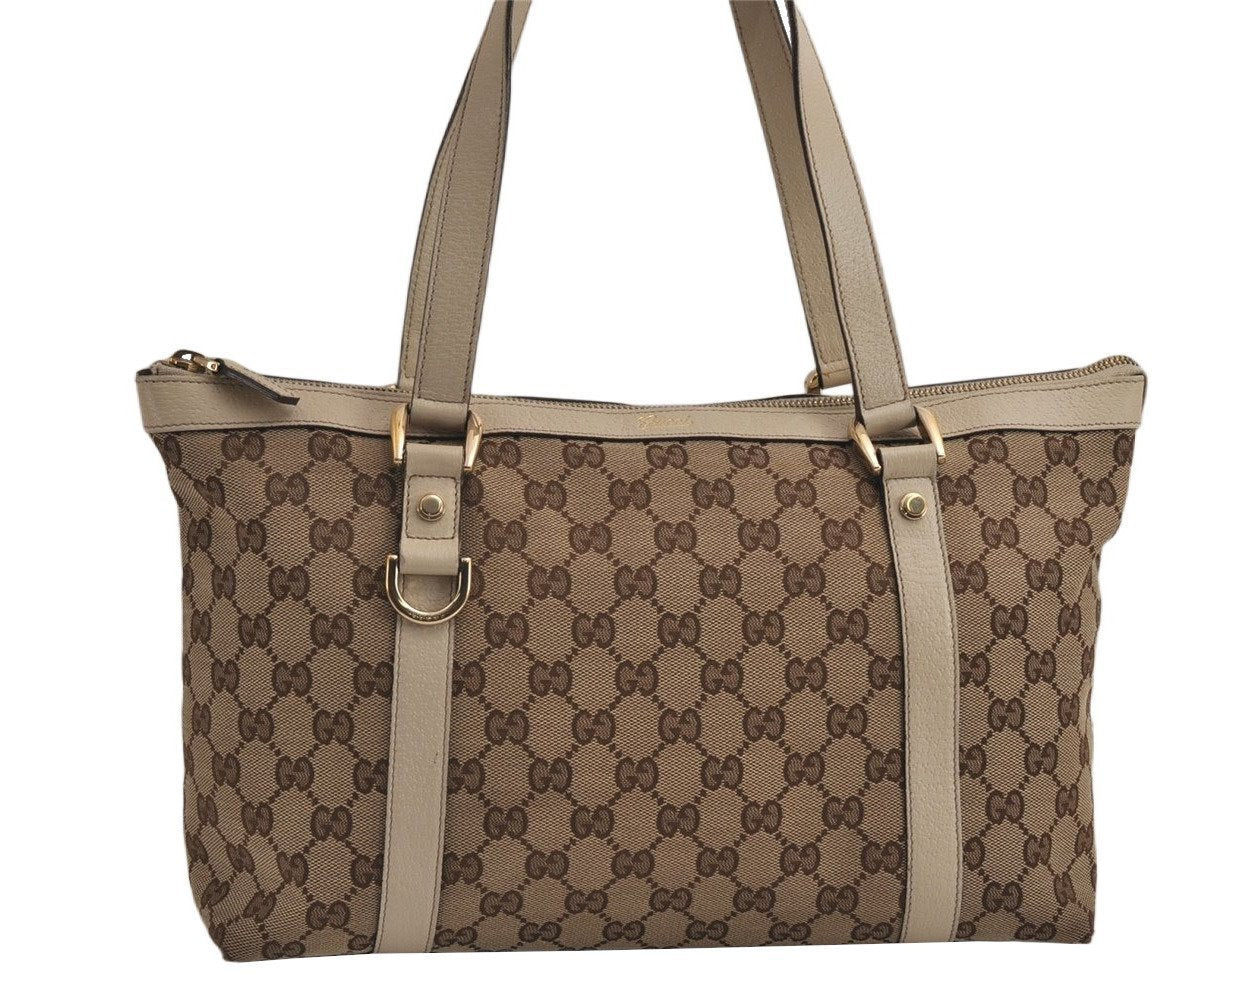 Authentic GUCCI Abbey Shoulder Tote Bag GG Canvas Leather 141470 Brown 0069K